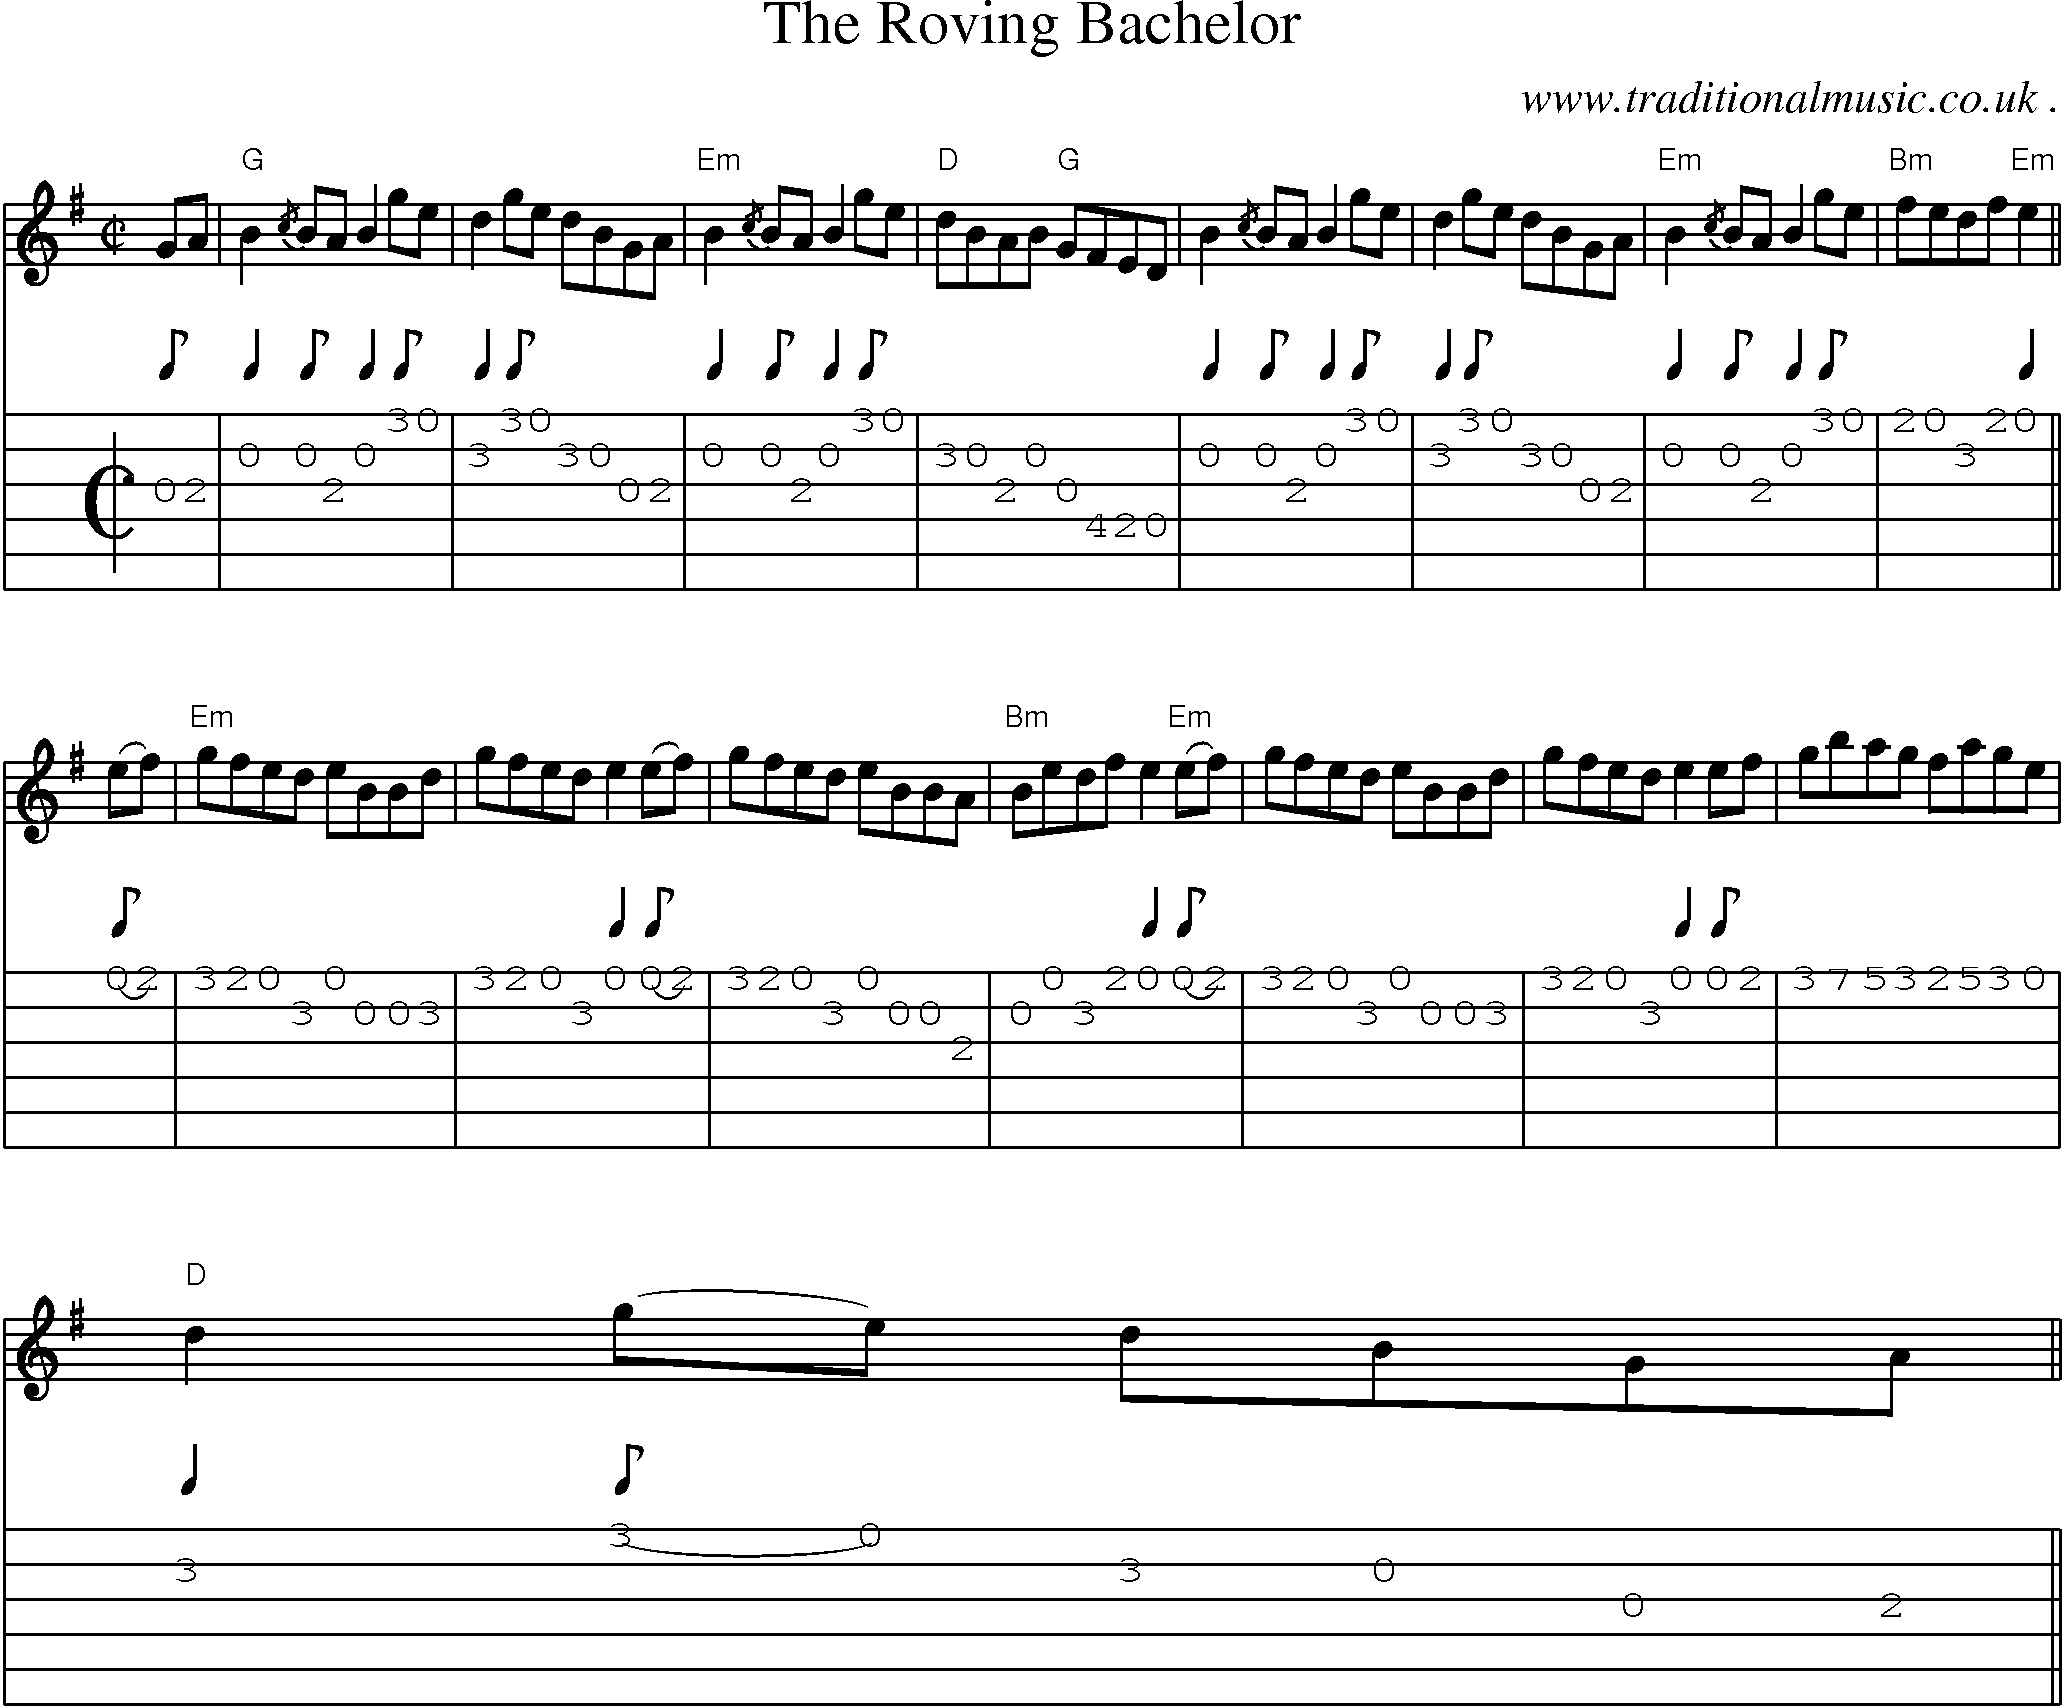 Music Score and Guitar Tabs for The Roving Bachelor